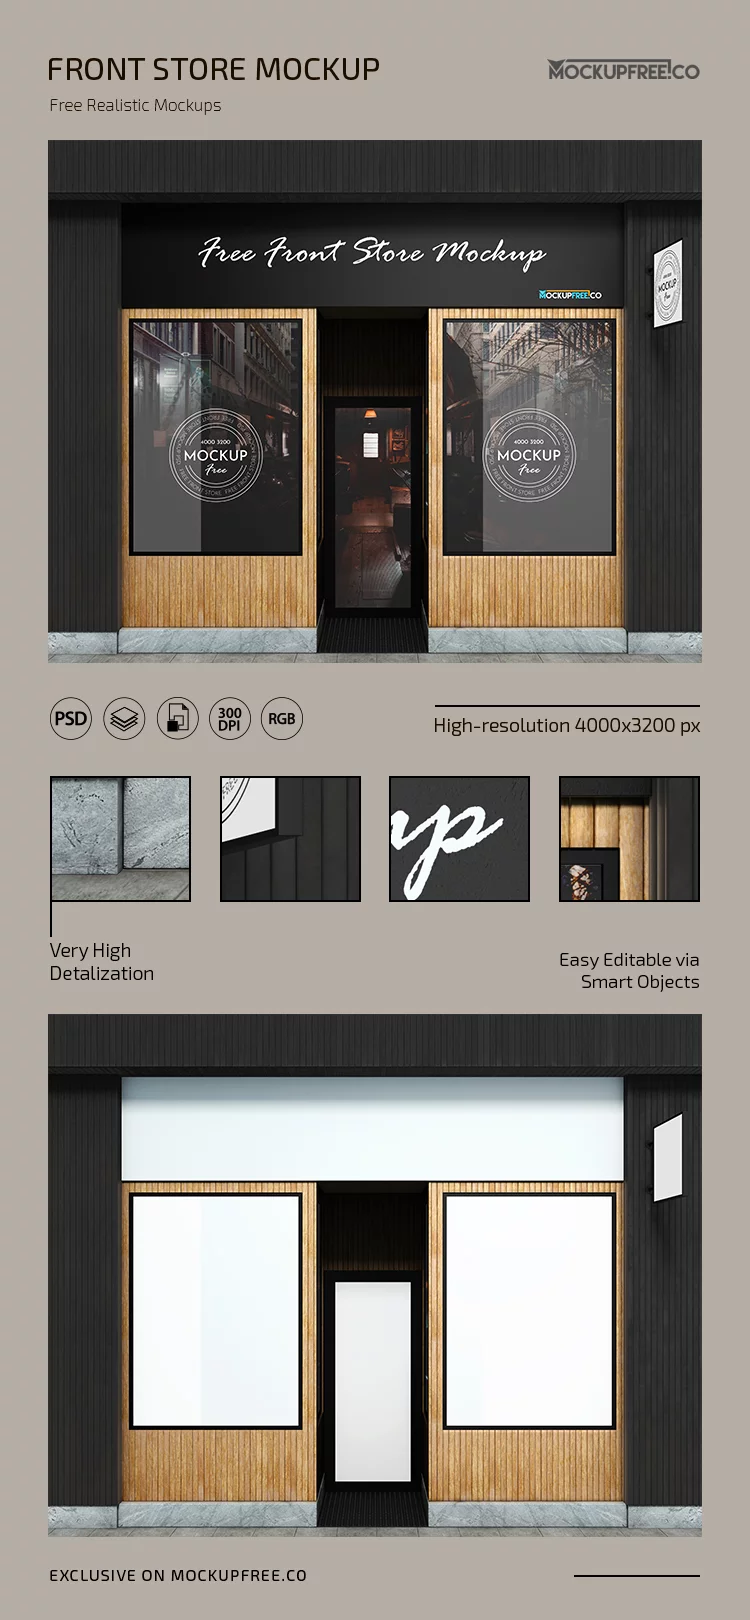 Free front store mockup psd